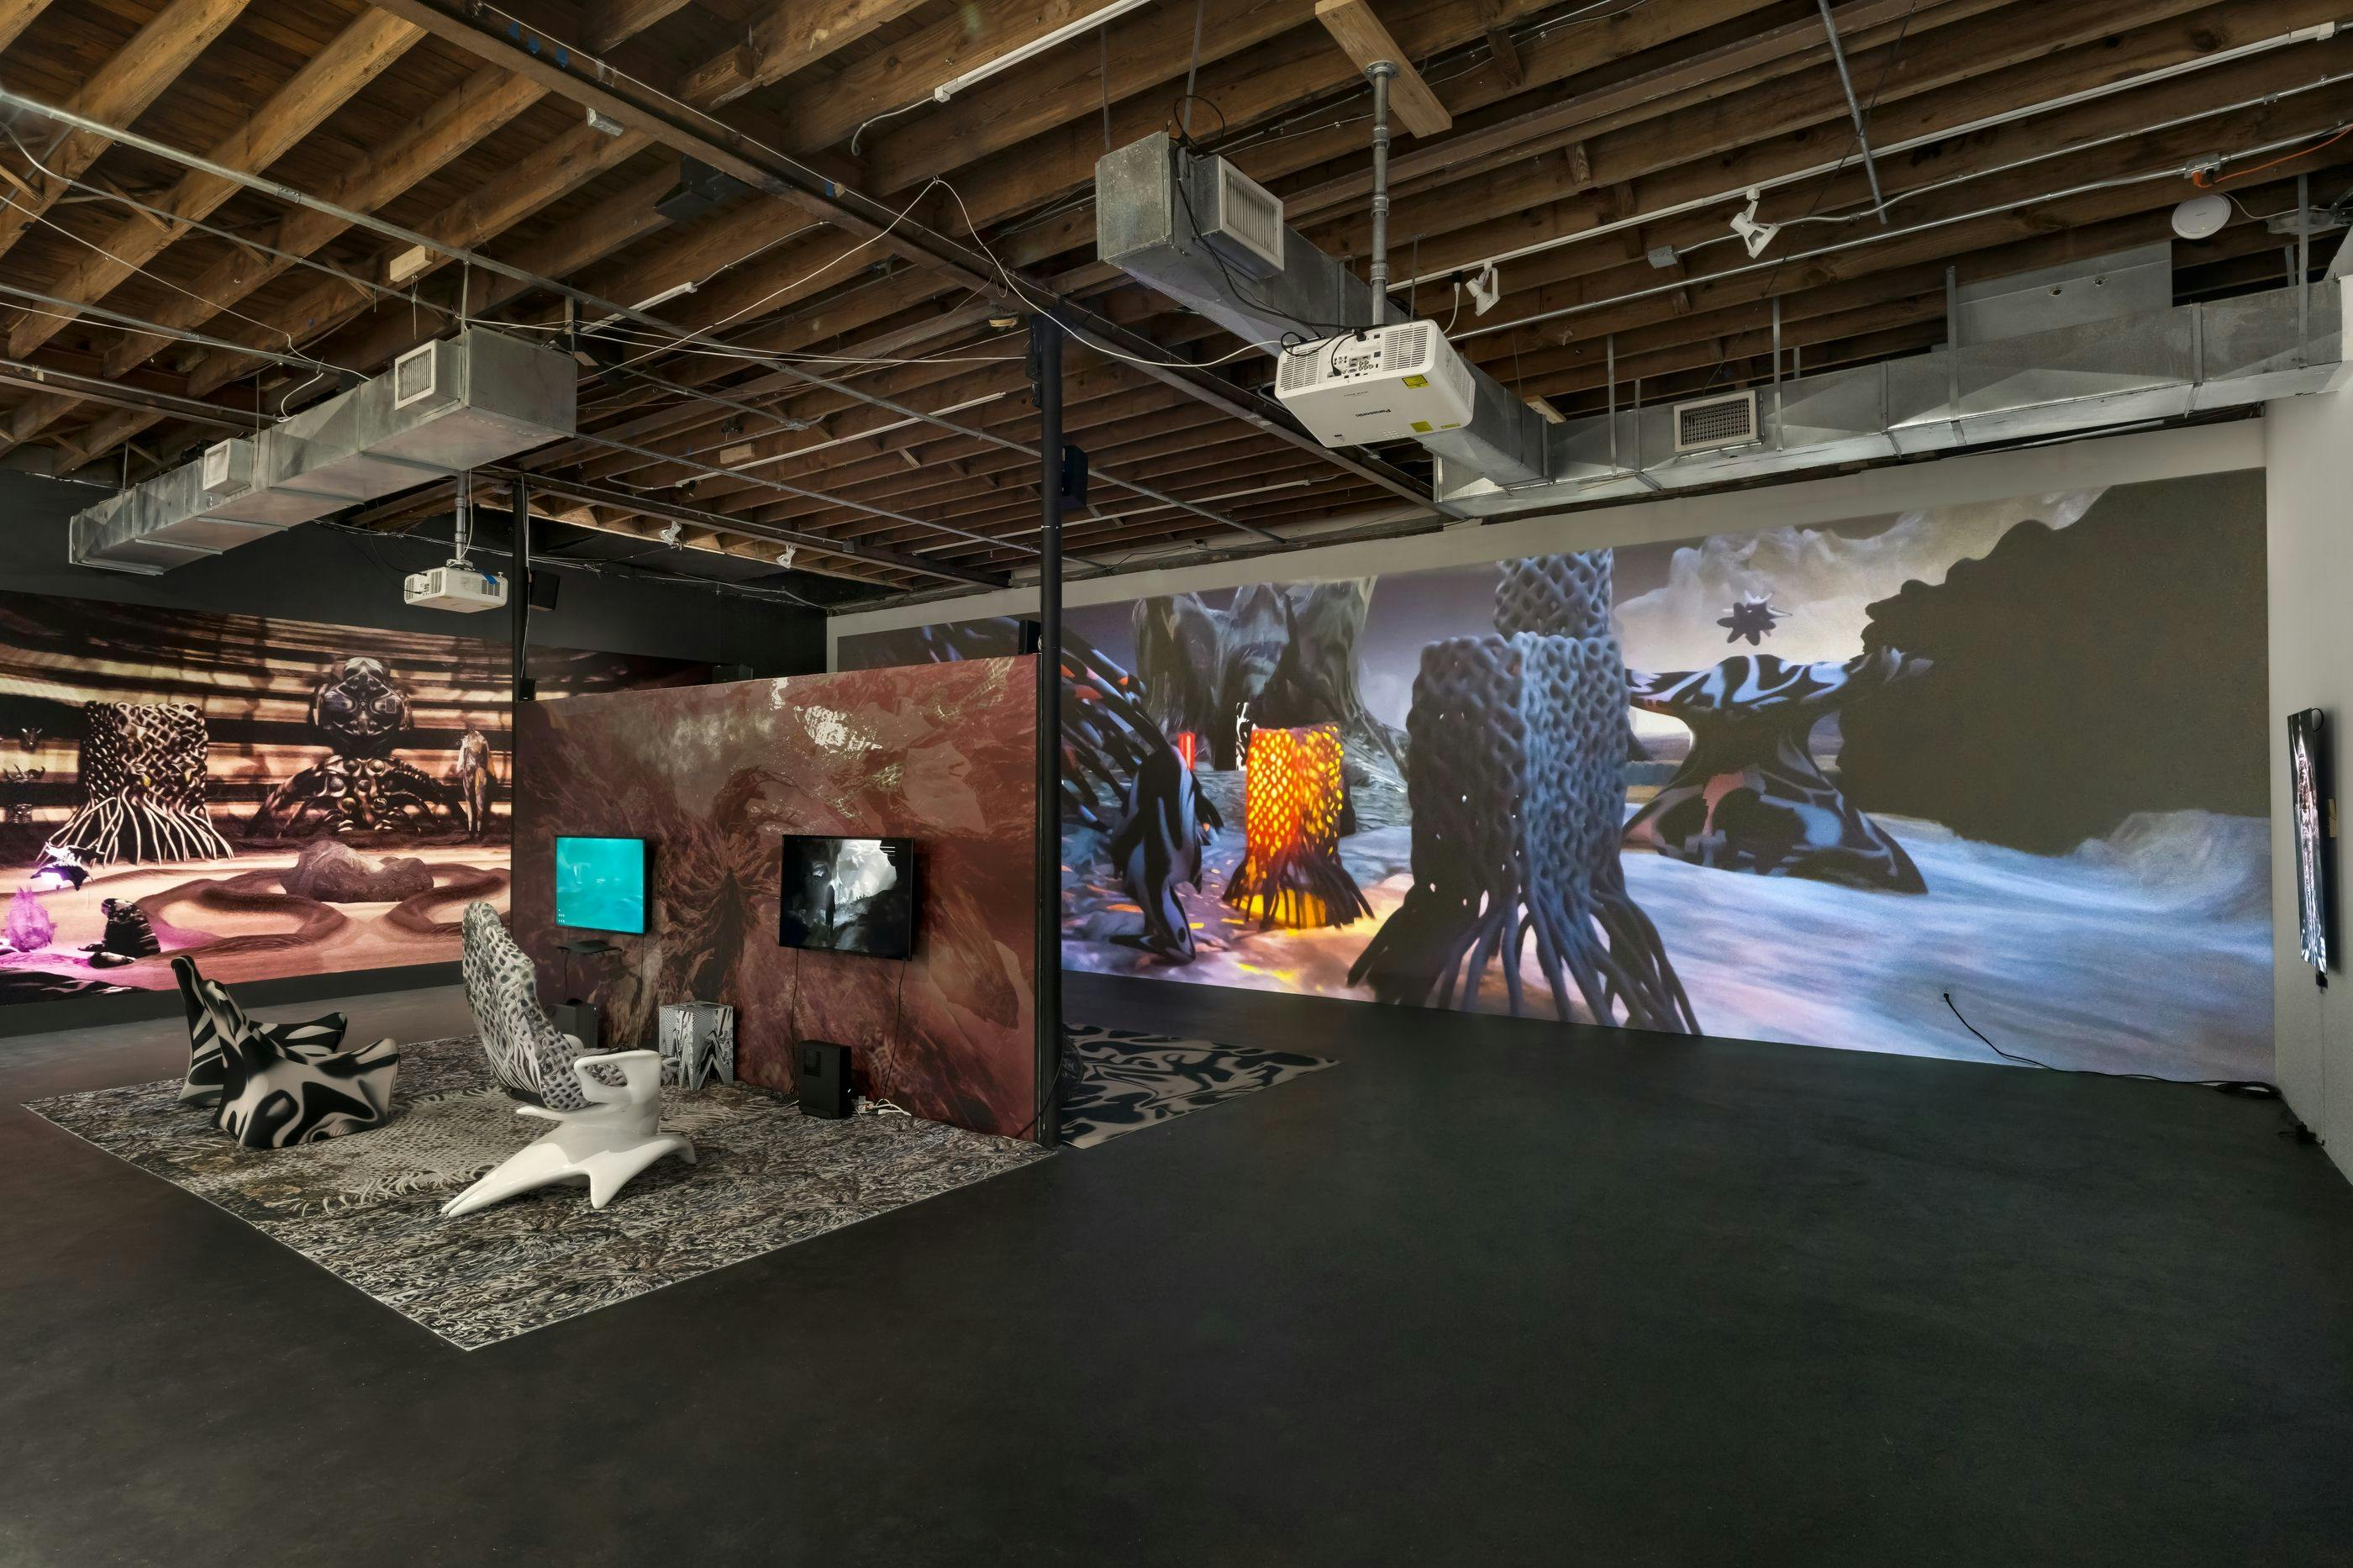 An installation view of a gallery show in a large room with tall ceilings: in the background is a wall-sized projection of a video game, depicting a surreal, abstracted landscape, and in the foreground is a temporary wall outfitted with an amorphous texture, television monitors, textured carpet, and angular seats.